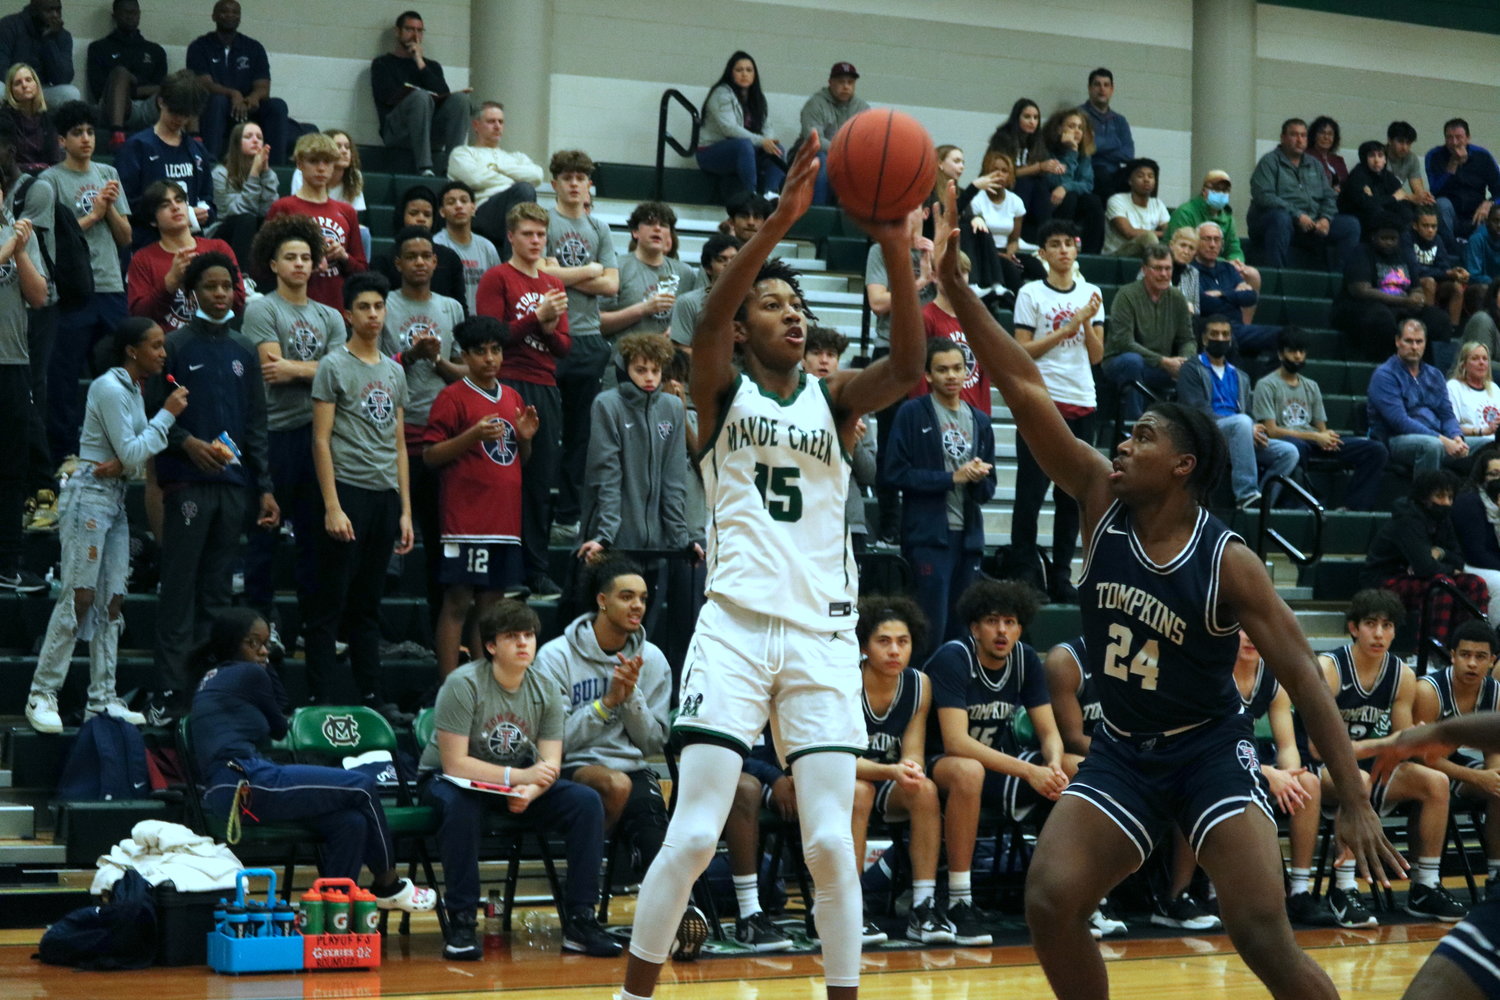 Jamal Chretien shoots a 3-pointer during Wednesday’s game between Mayde Creek and Tompkins at the Mayde Creek gym.